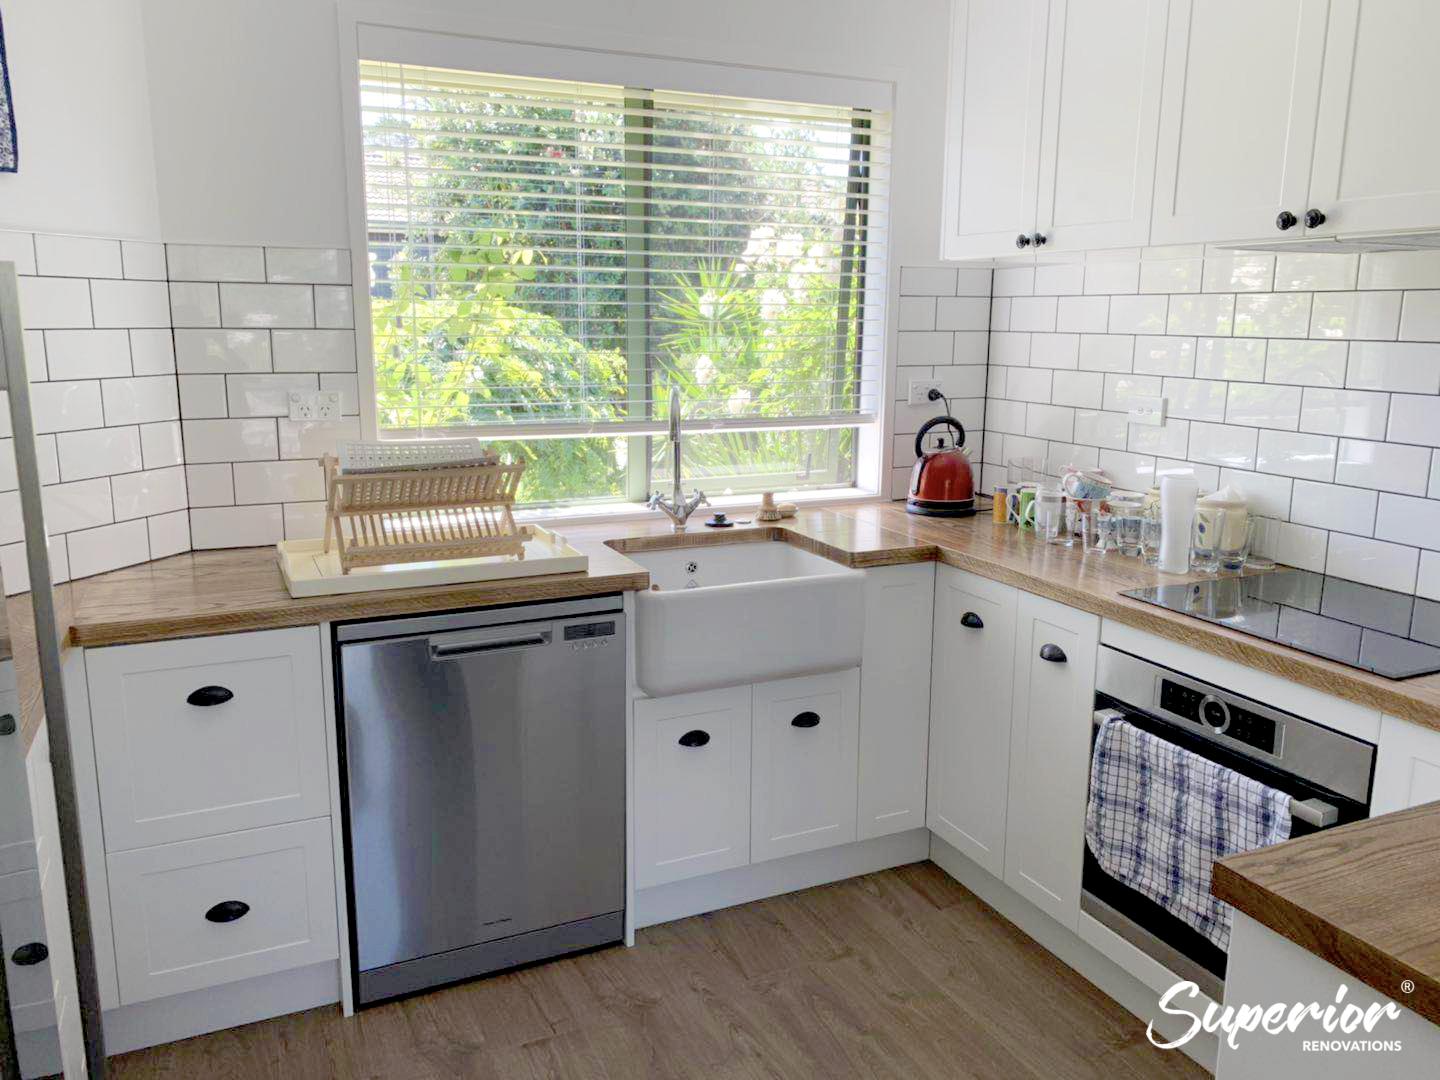 Cottage Style Country Kitchen Renovation in Mangere Bridge ...